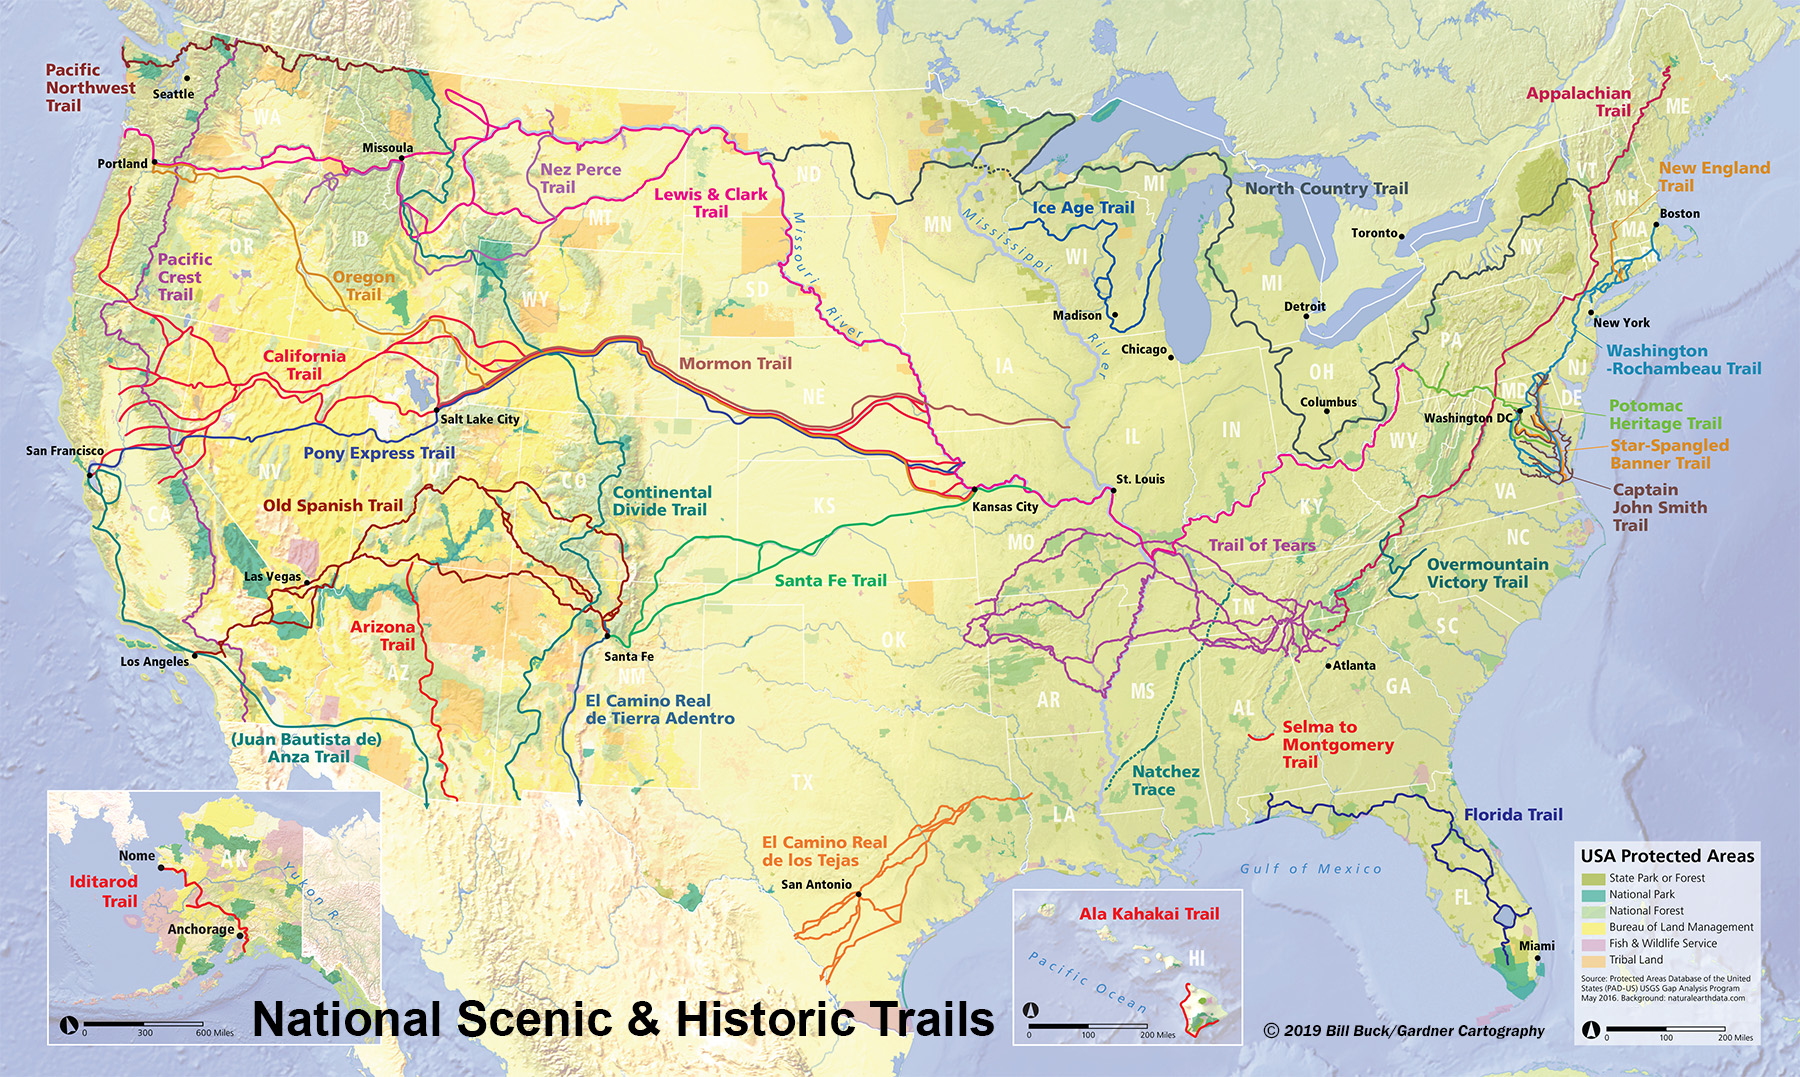 National Trails System Map – courtesy of National Park Service